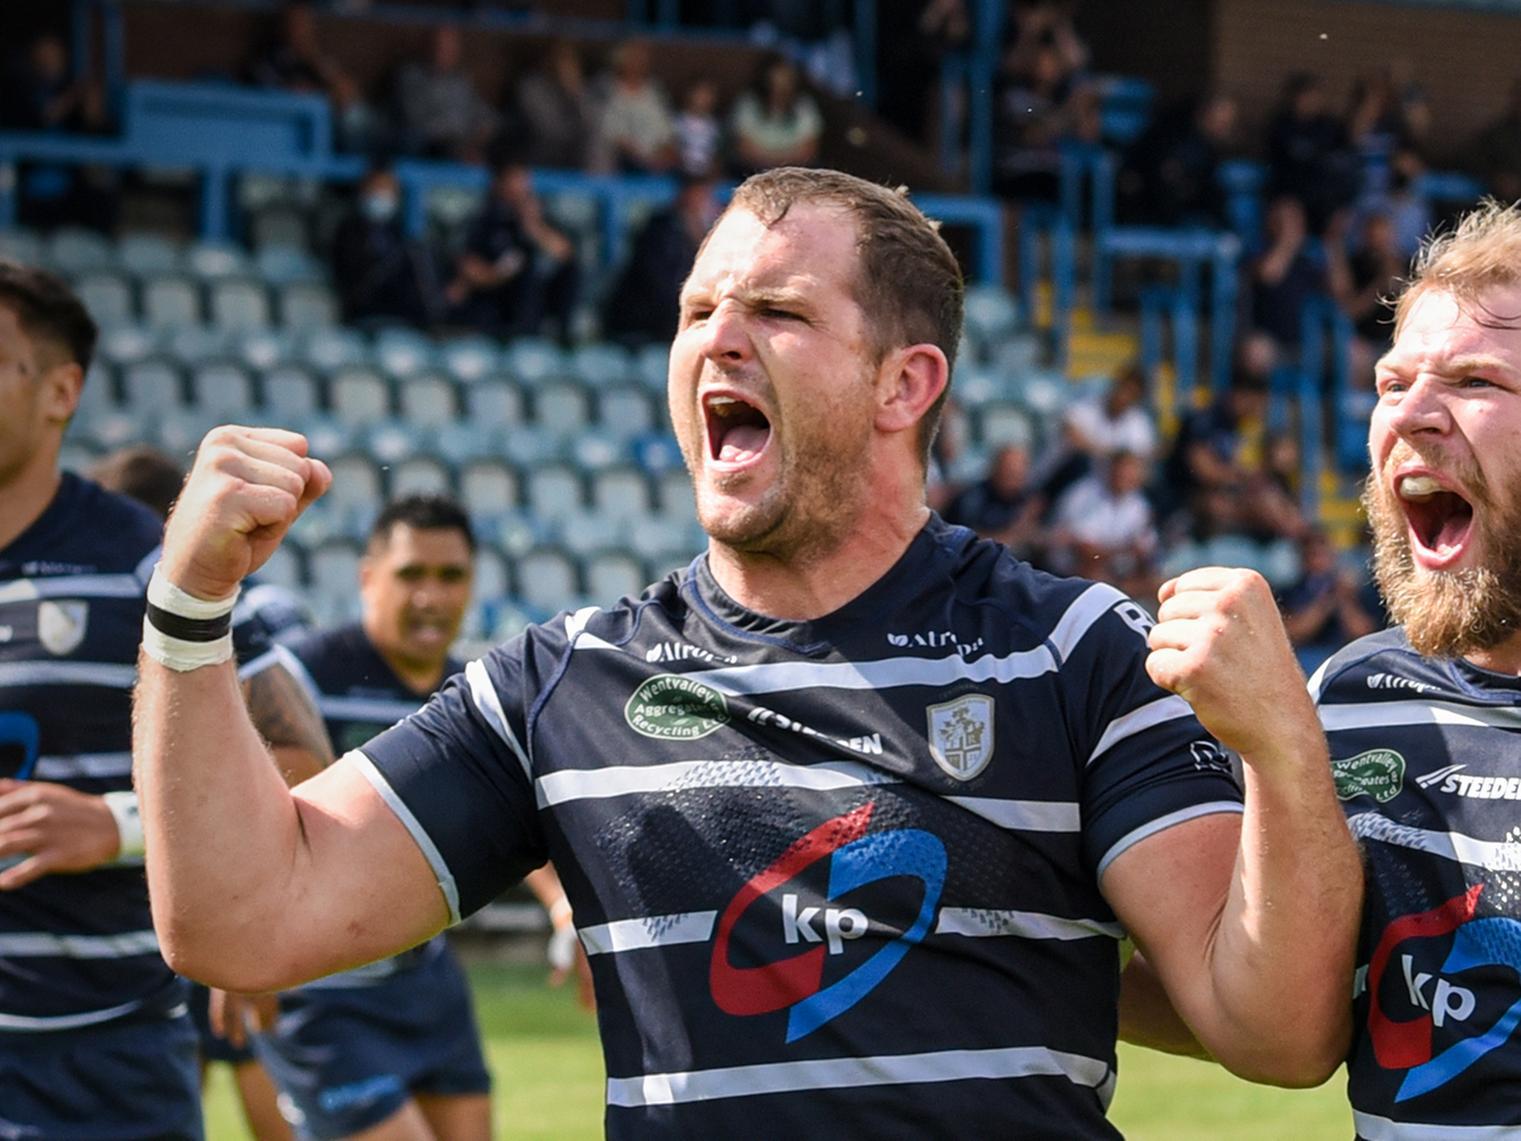 James Lockwood proud to lead Featherstone Rovers out at Wembley